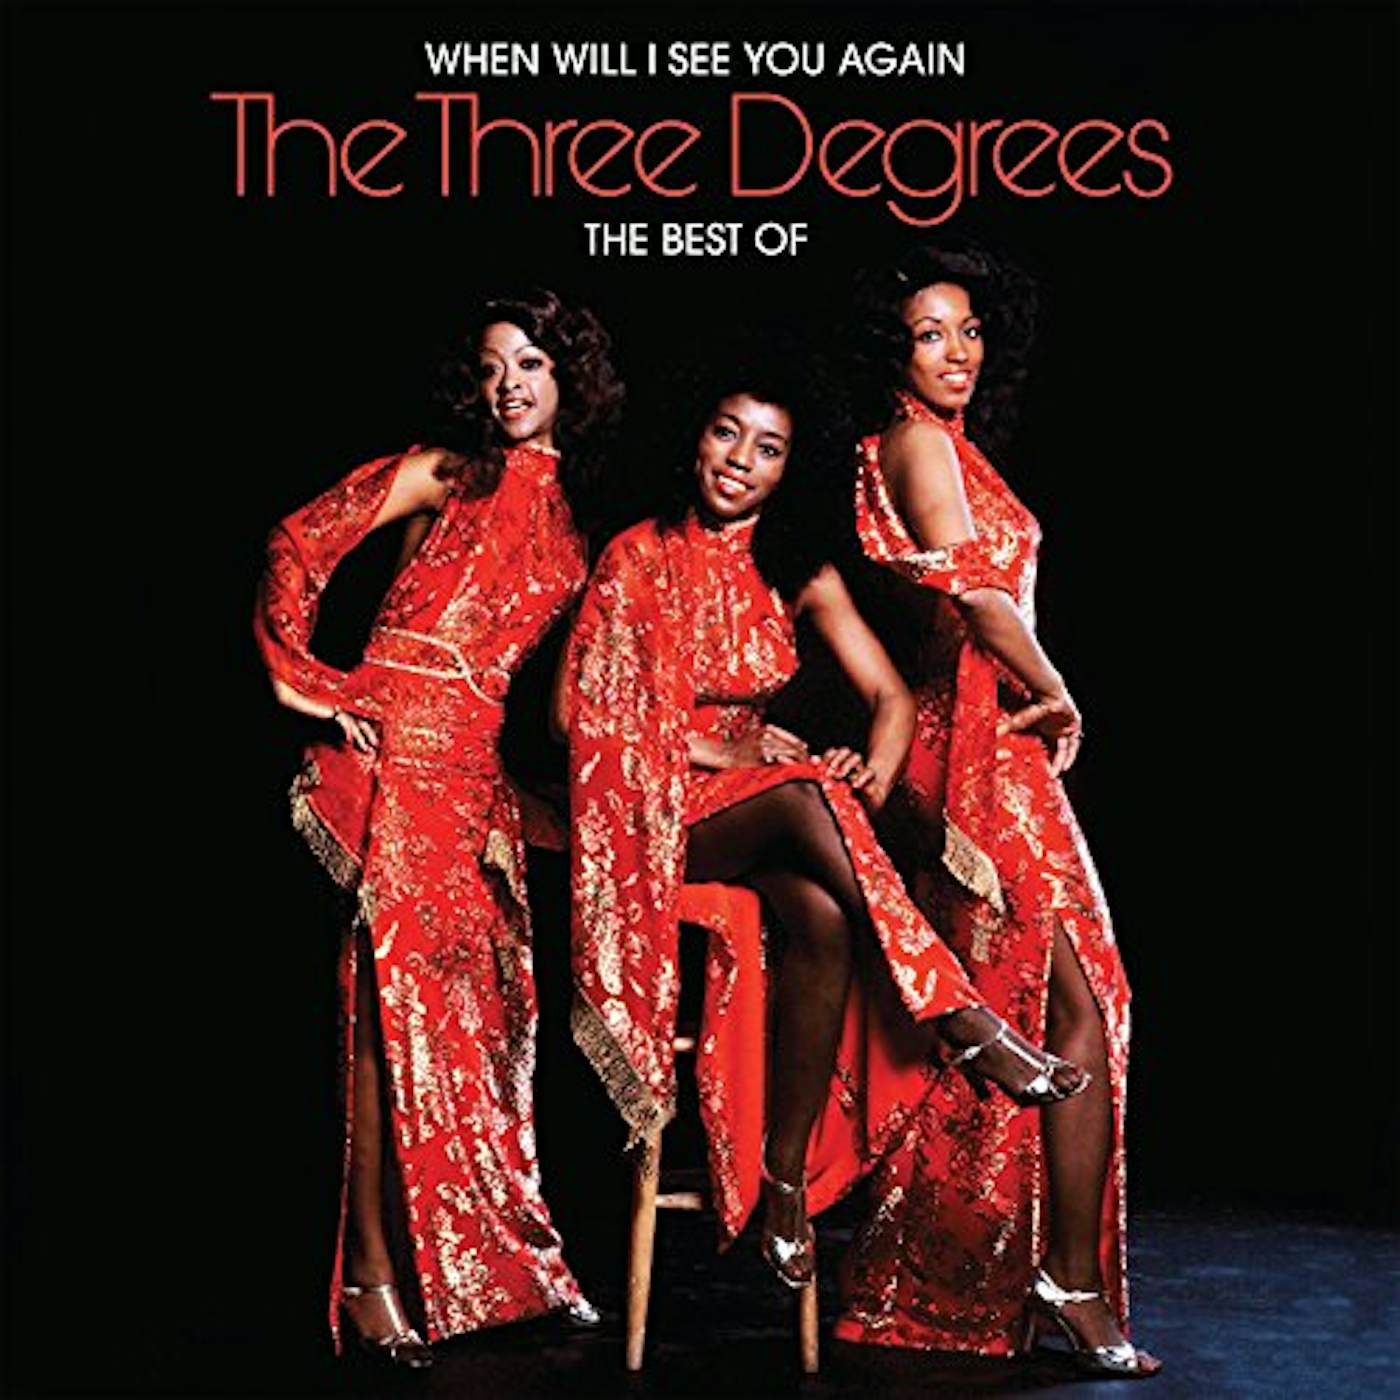 The Three Degrees WHEN WILL I SEE YOU AGAIN: BEST OF CD